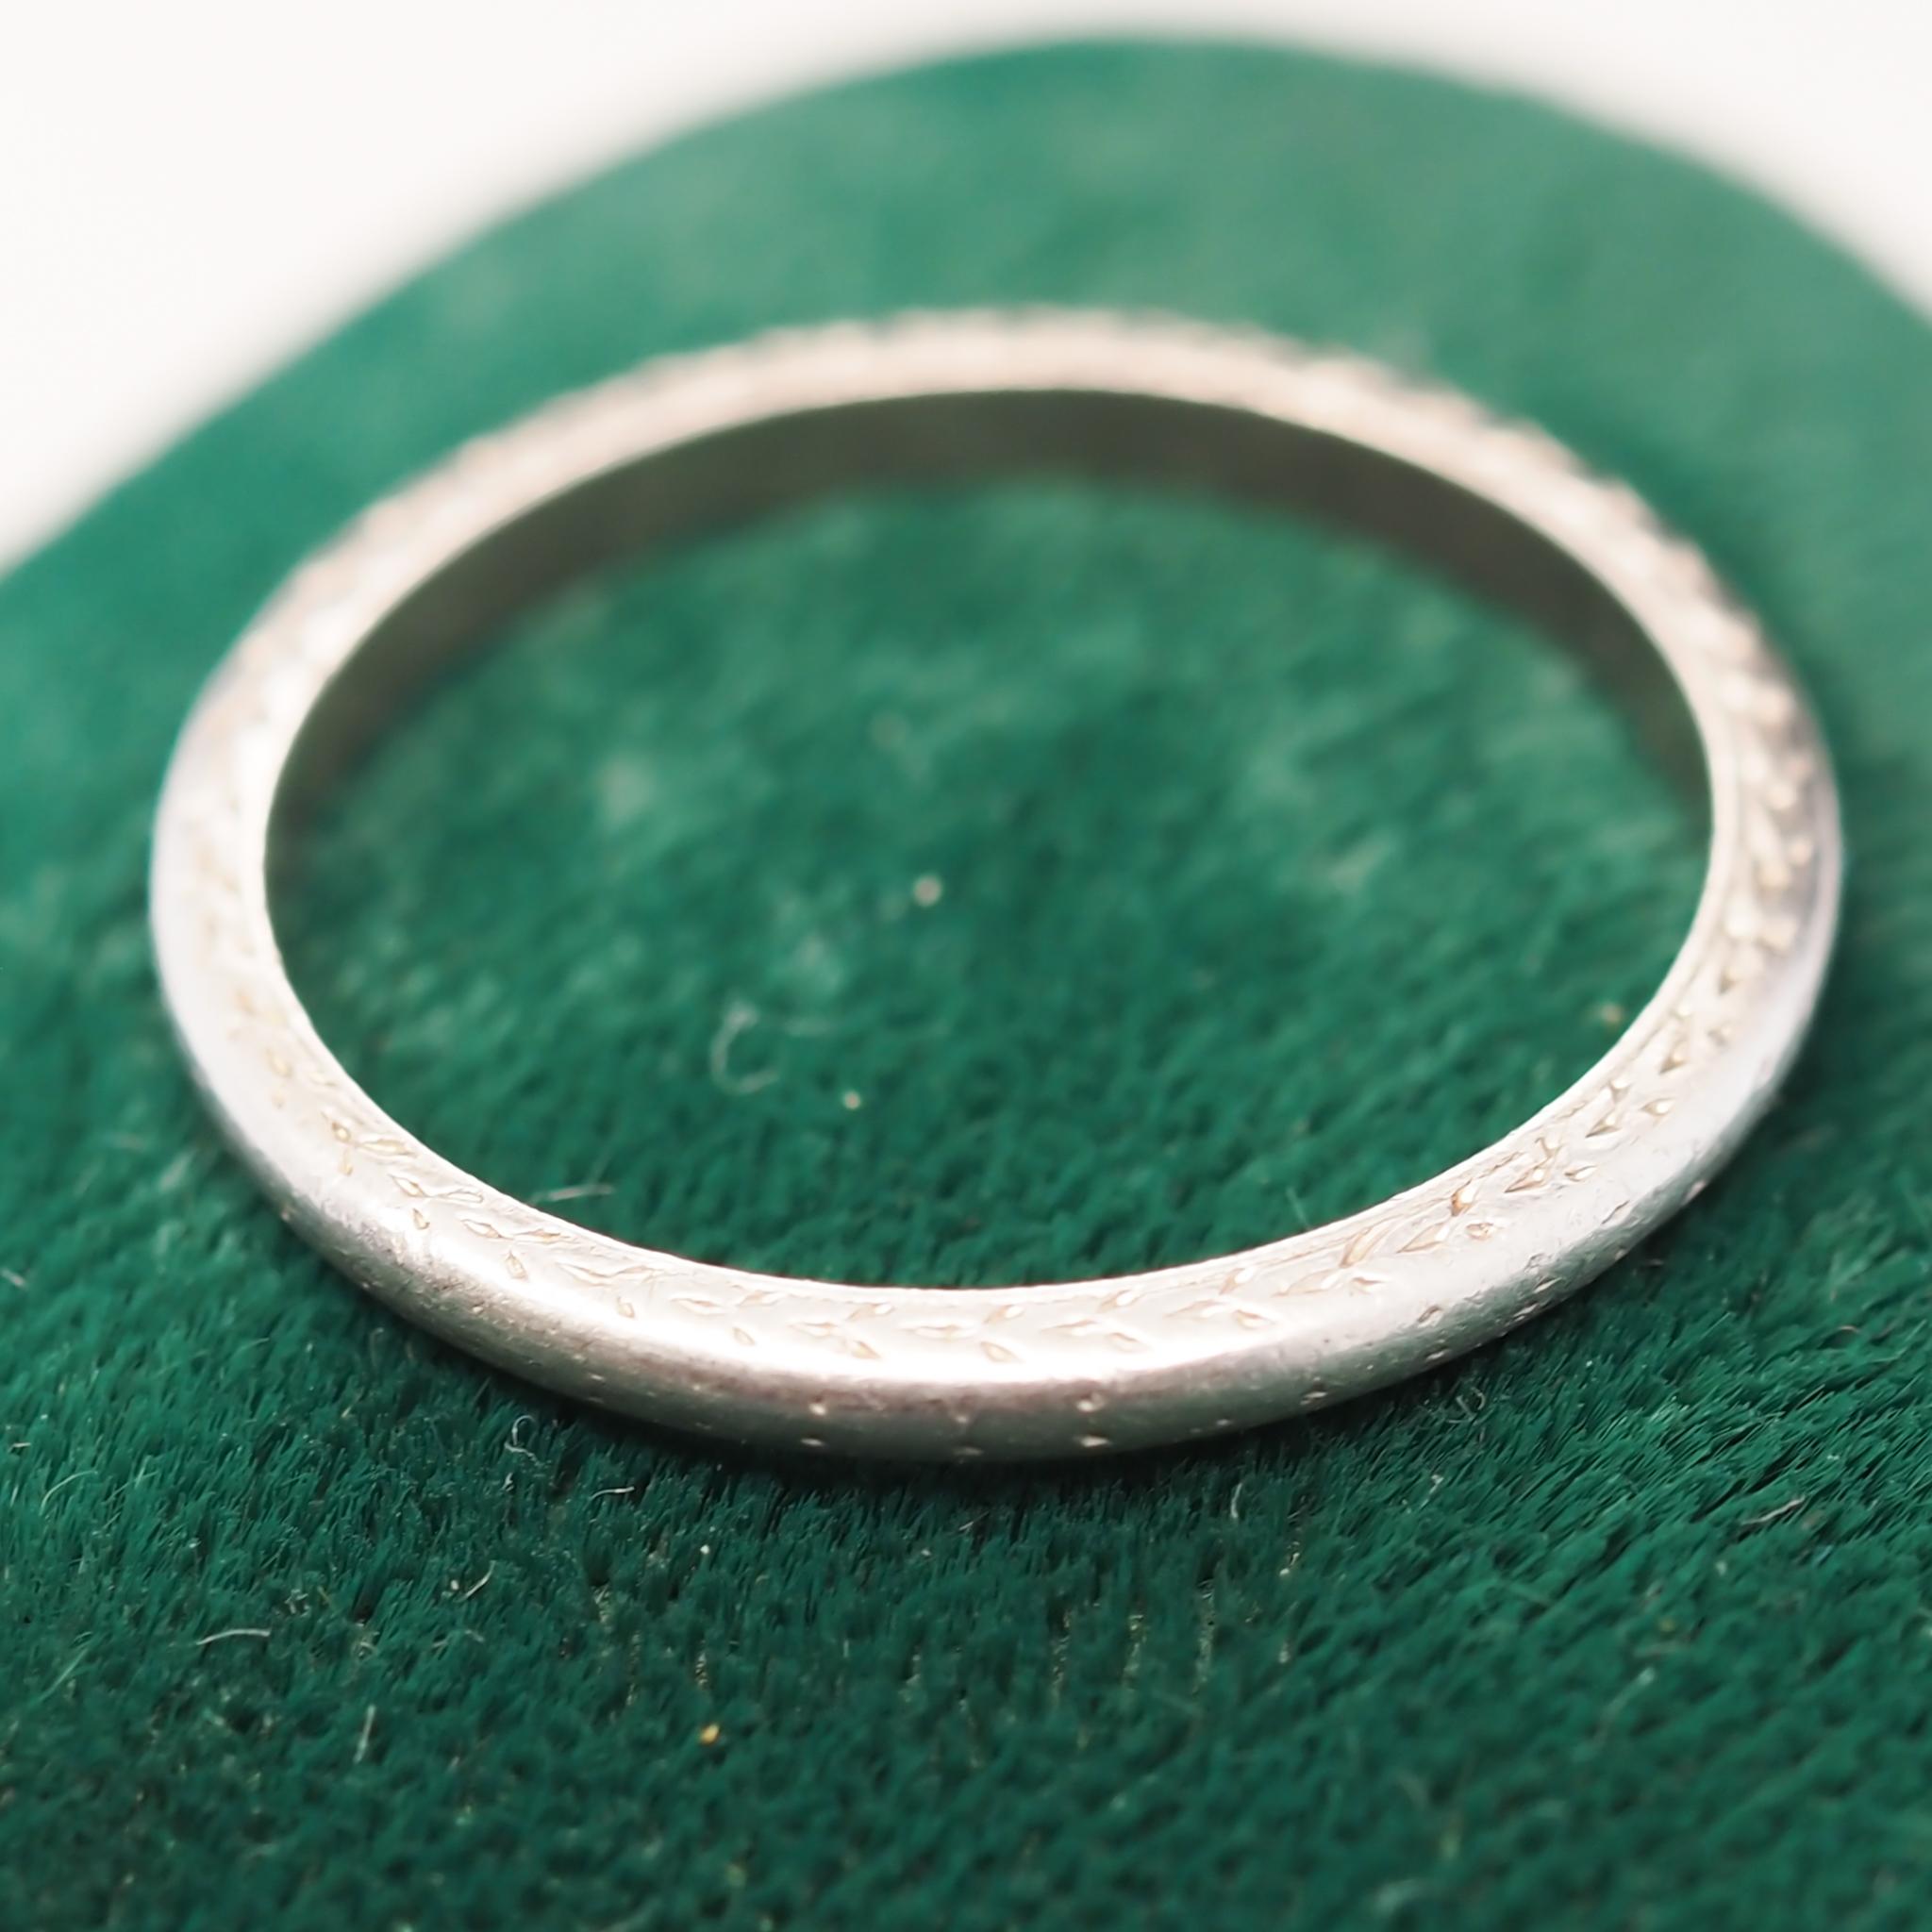 Year: 1920s

Item Details:
Ring Size: 4.75
Metal Type: Platinum [Hallmarked, and Tested]
Weight: 2.3 grams

Band Width: 1.9 mm
Condition: Excellent

